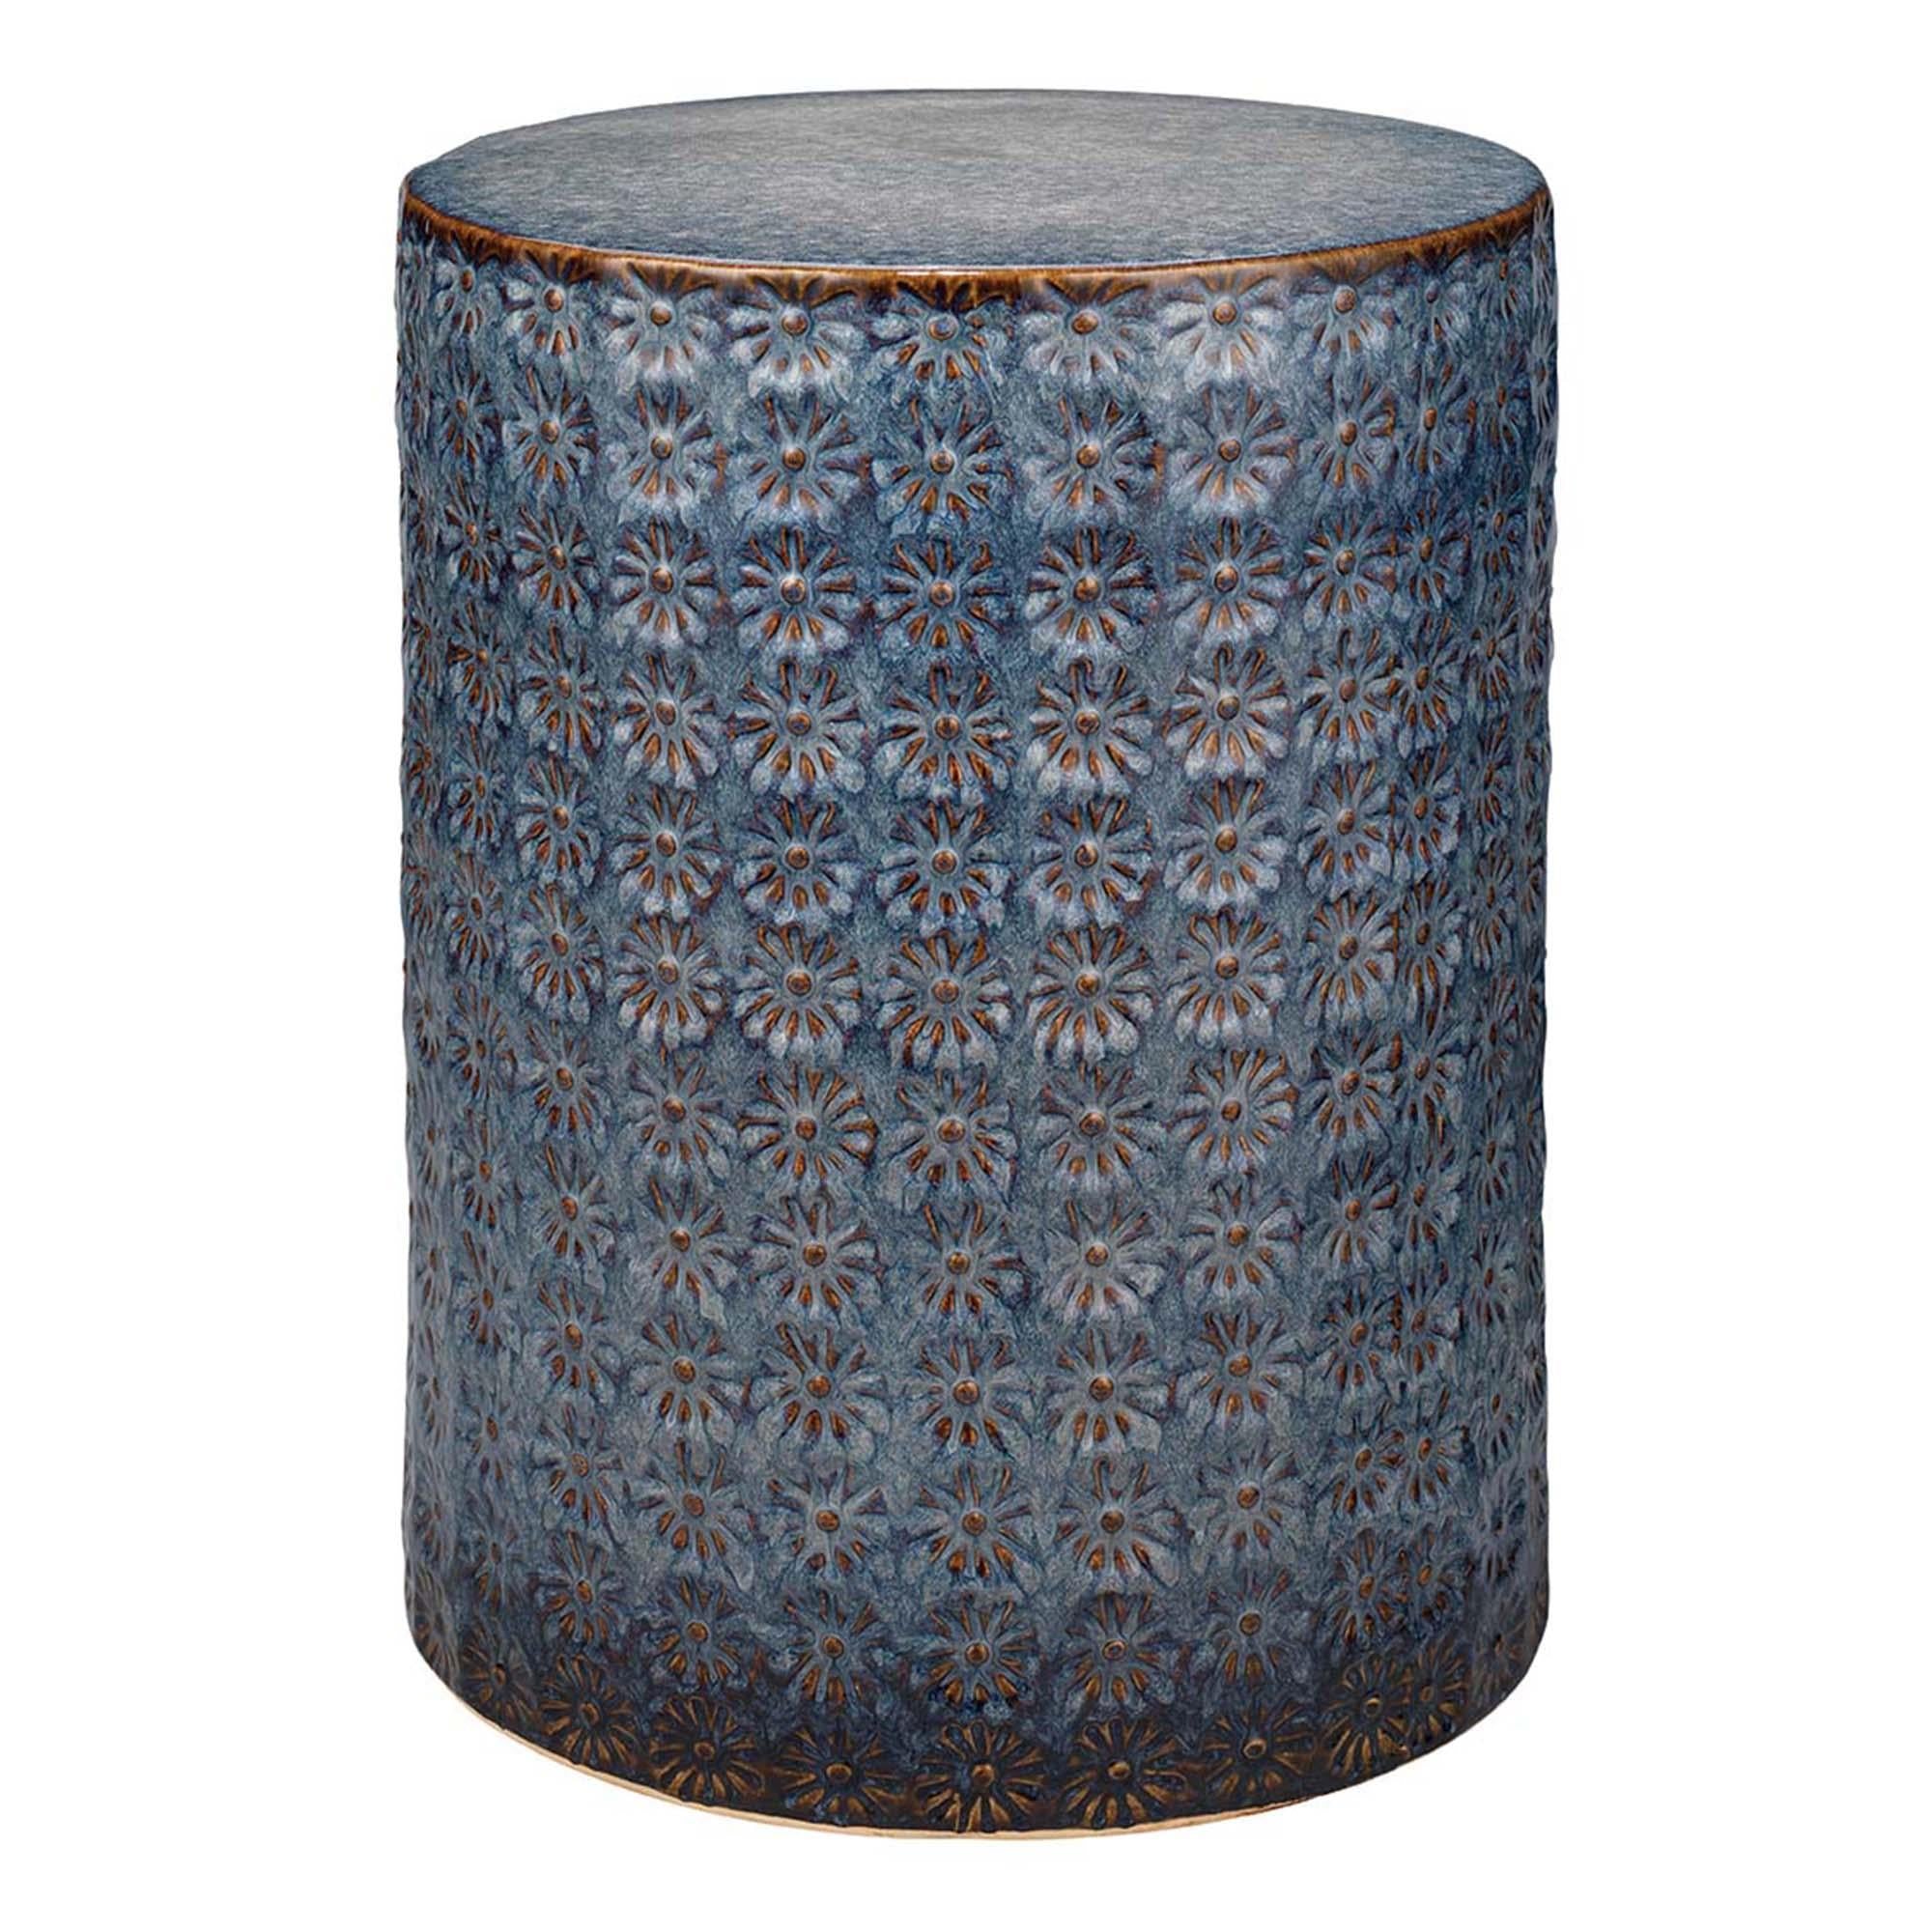 Image of Wildflower Side Table - Available in 3 Colors